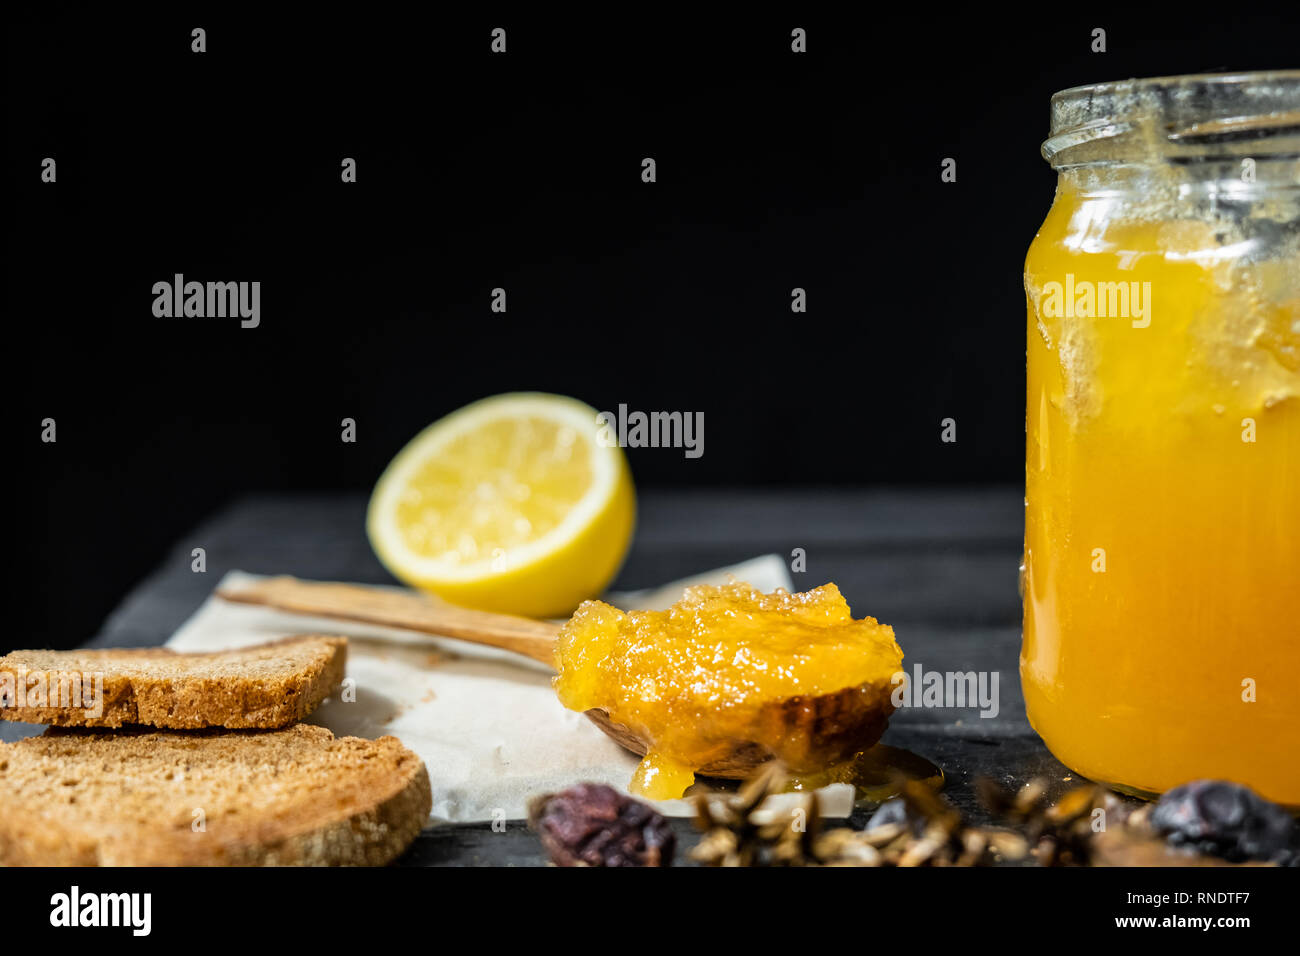 Spoonful of honey on dark rustic background. Crystallized home-made honey in jar, low-key shot Stock Photo